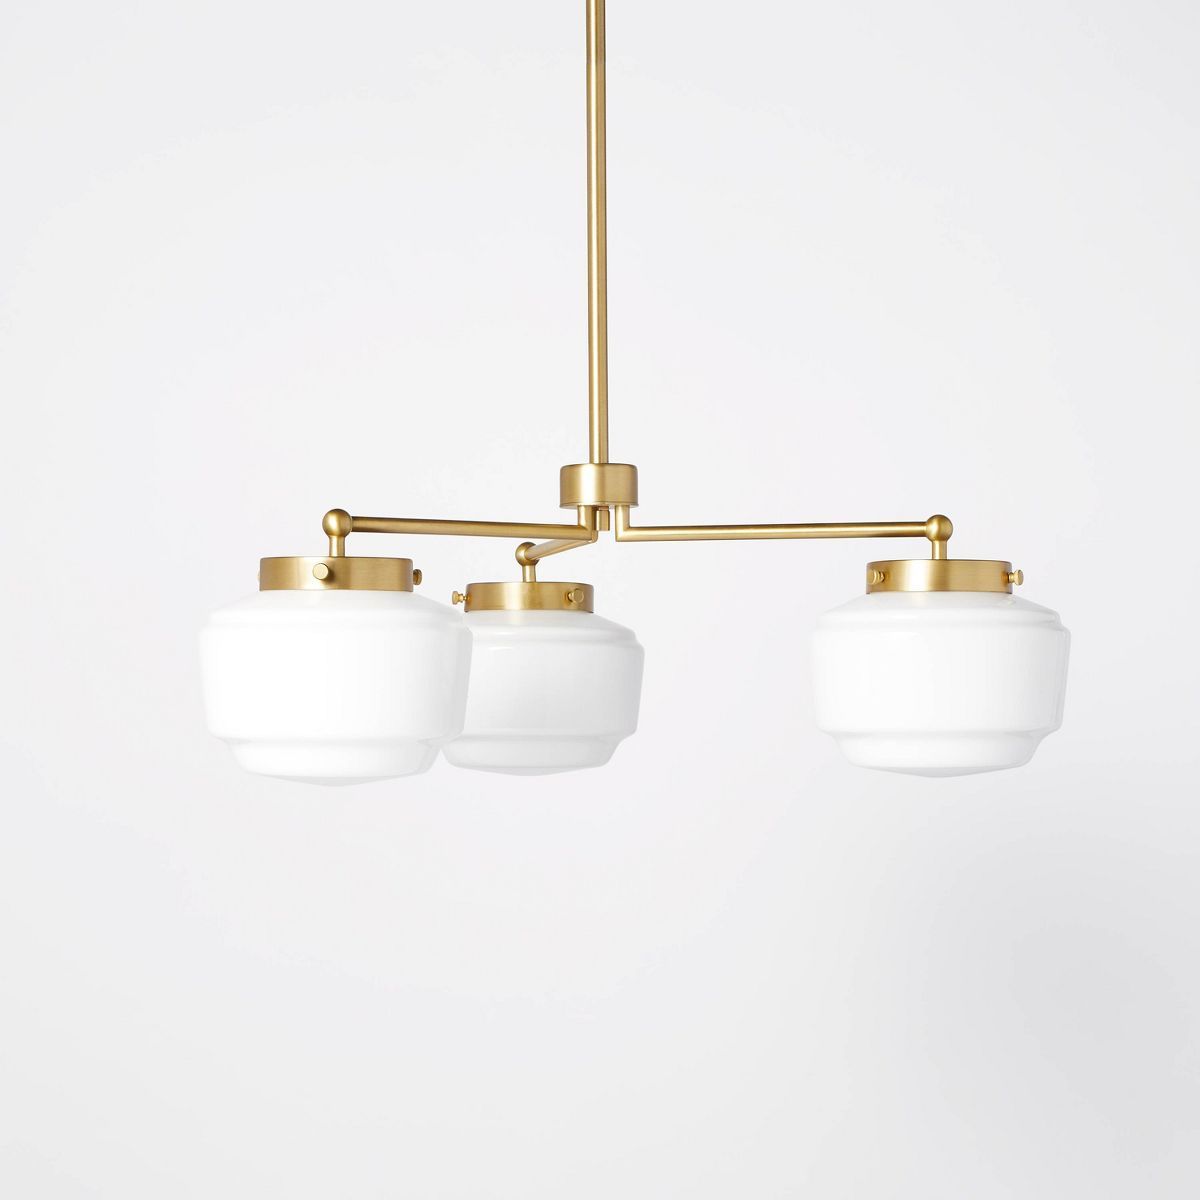 3-Arm Milk Glass Chandelier Ceiling Light Brass Finish - Hearth & Hand™ with Magnolia | Target